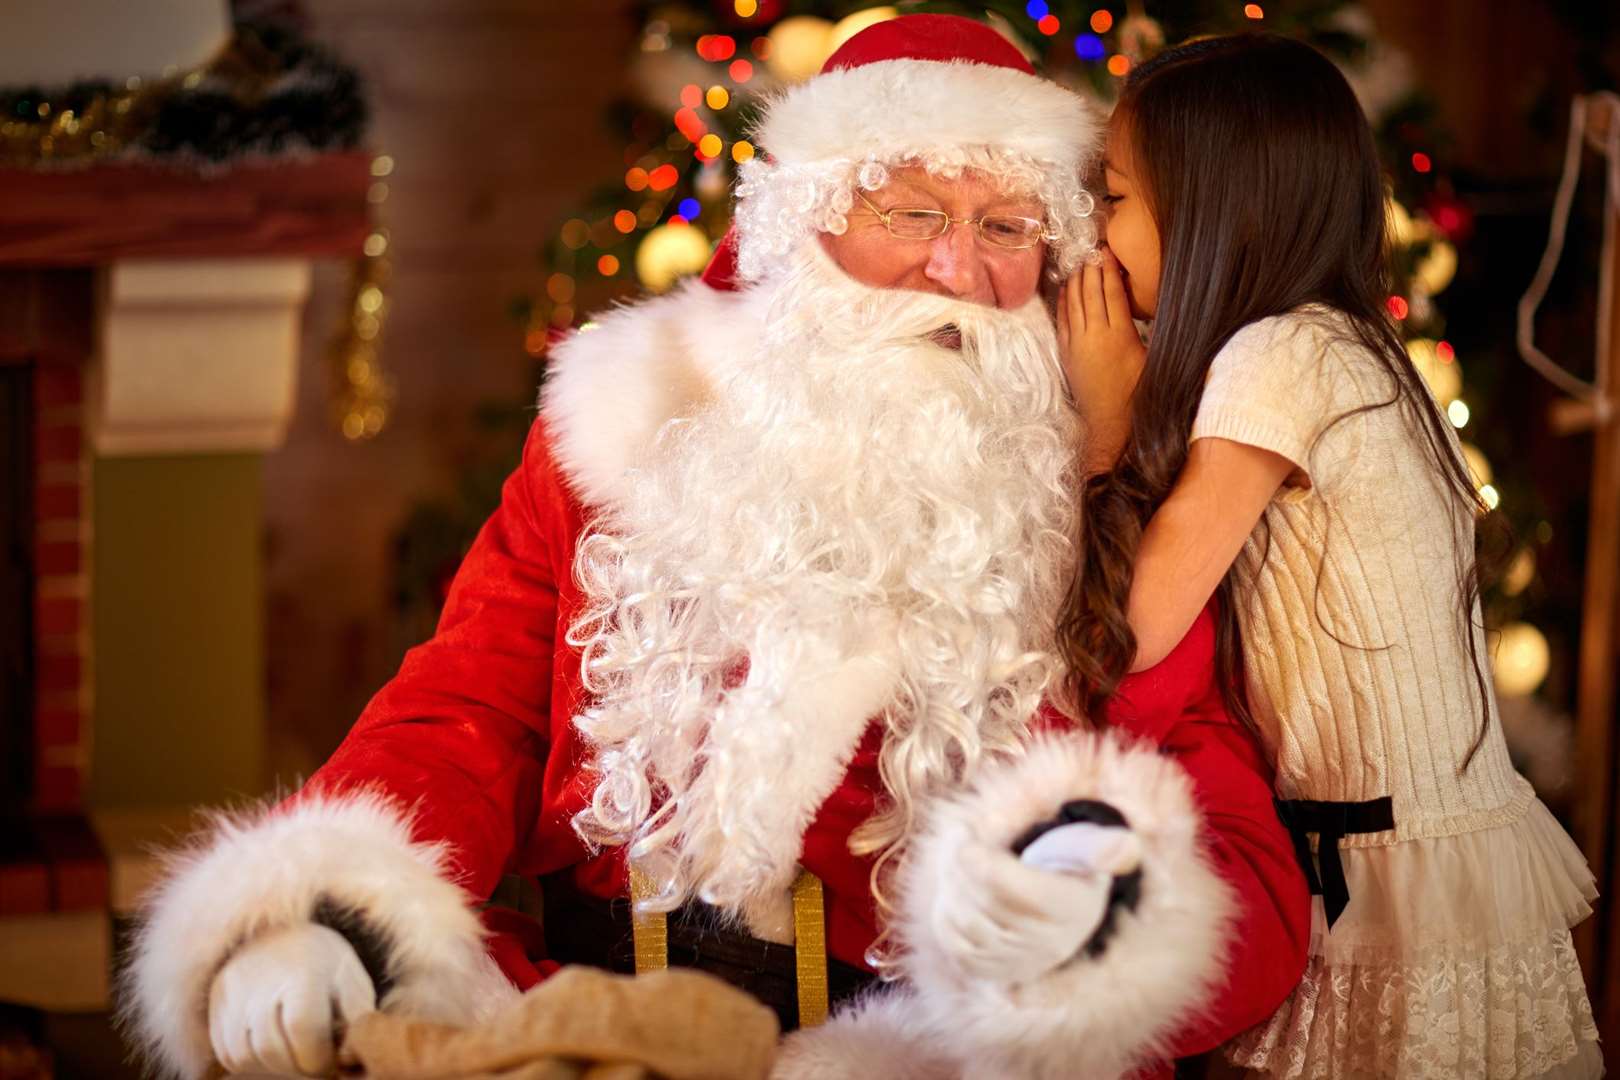 A Christmas grotto will open at the Pentagon Shopping Centre from November 23